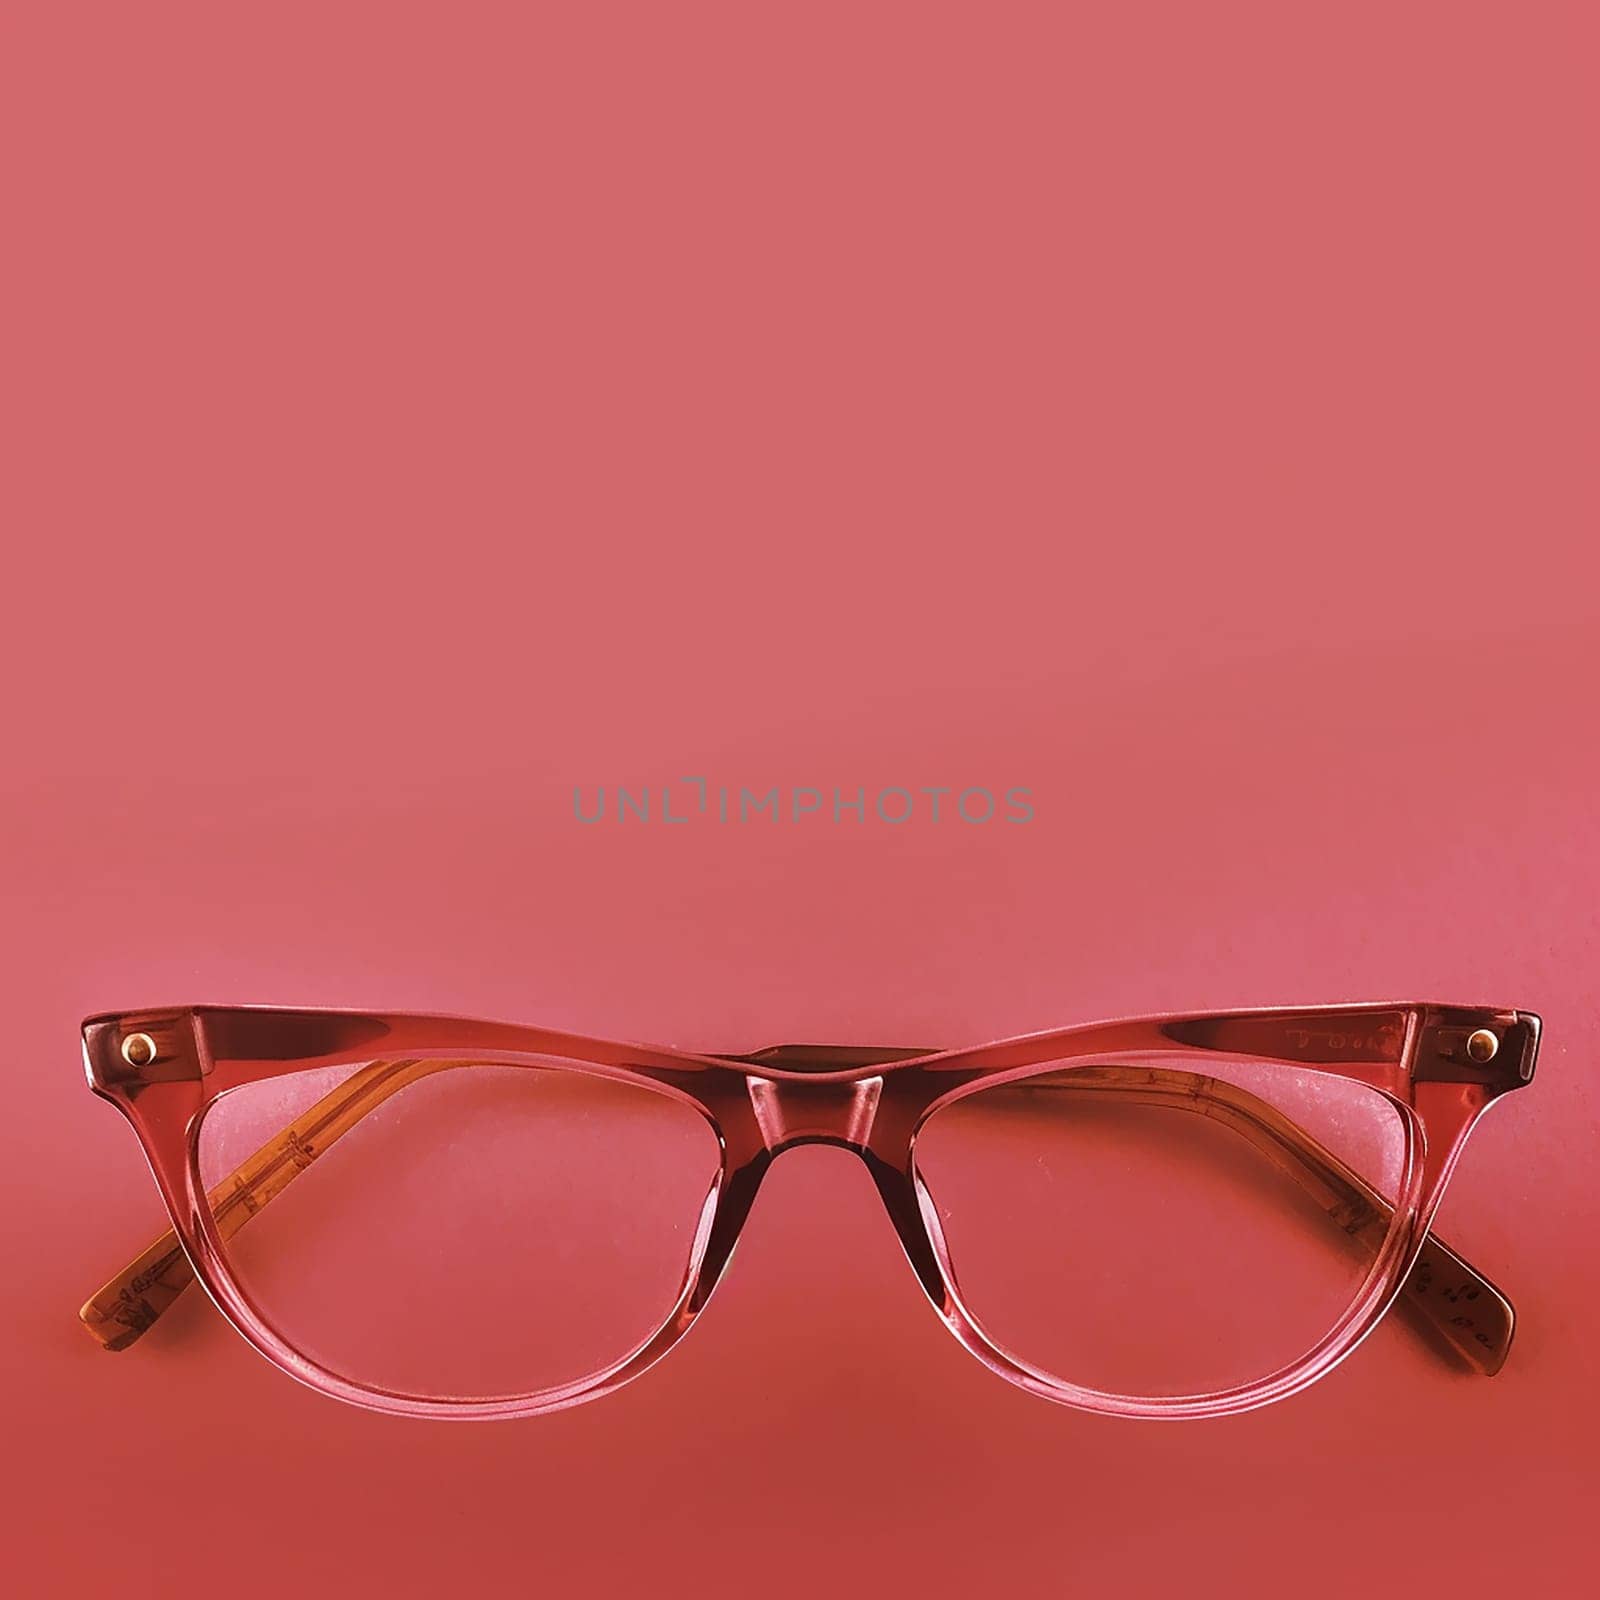 Transparent pink glasses on a plain red background. by Hype2art